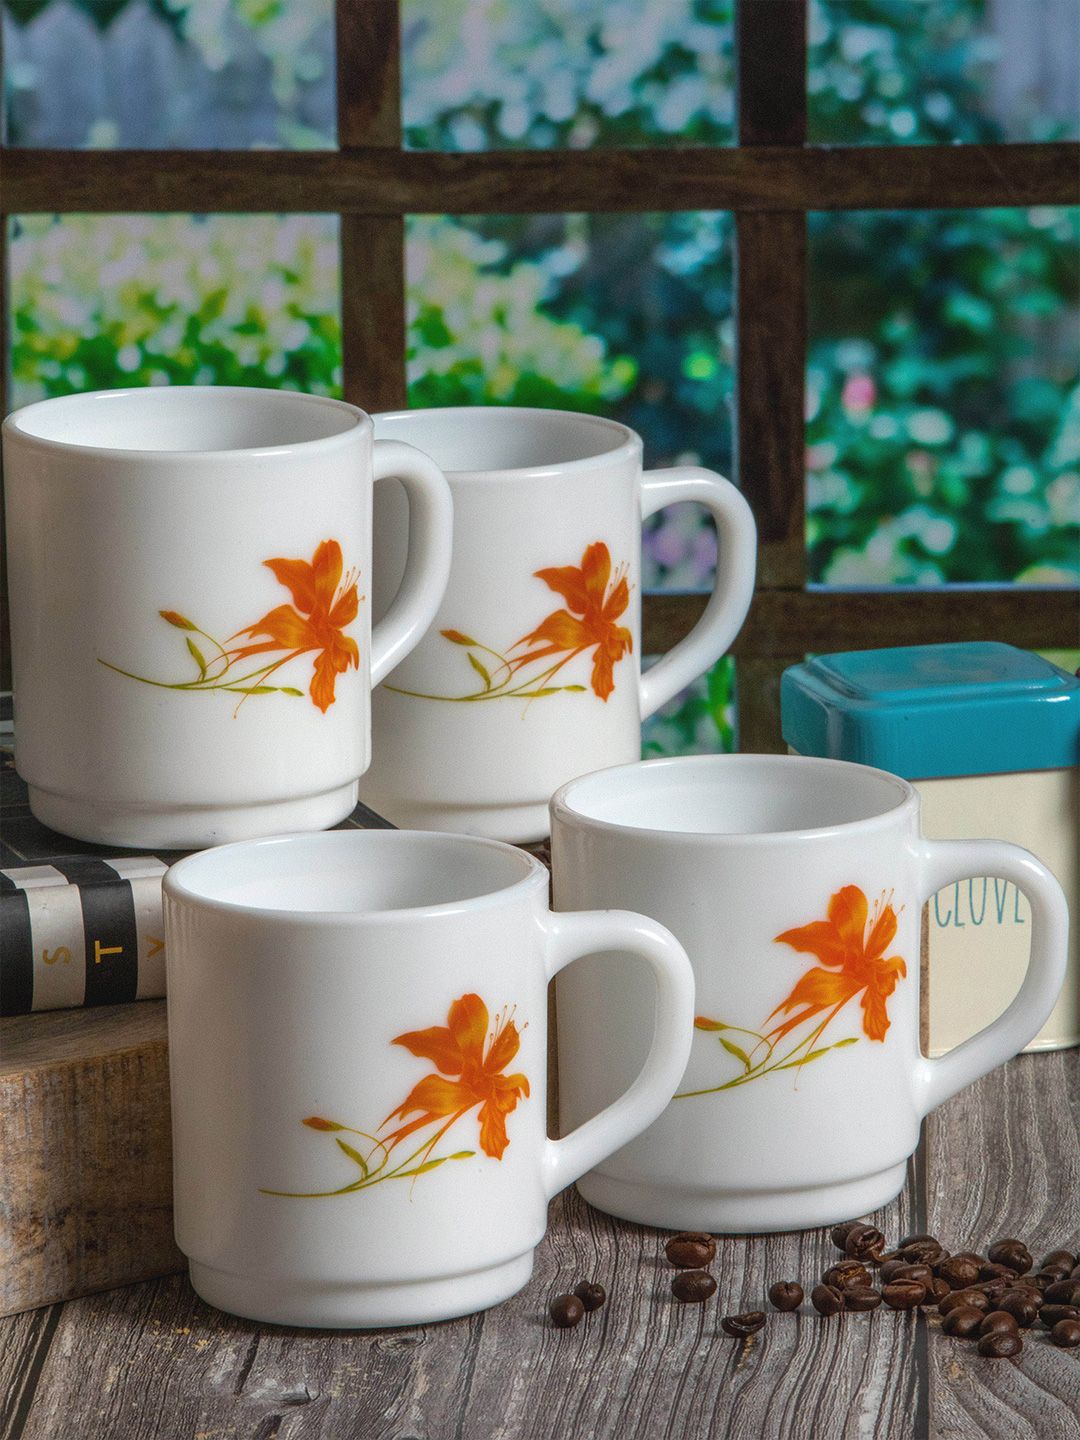 Cello White & Orange Floral Printed Opalware Glossy Mugs Set of Cups and Mugs Price in India